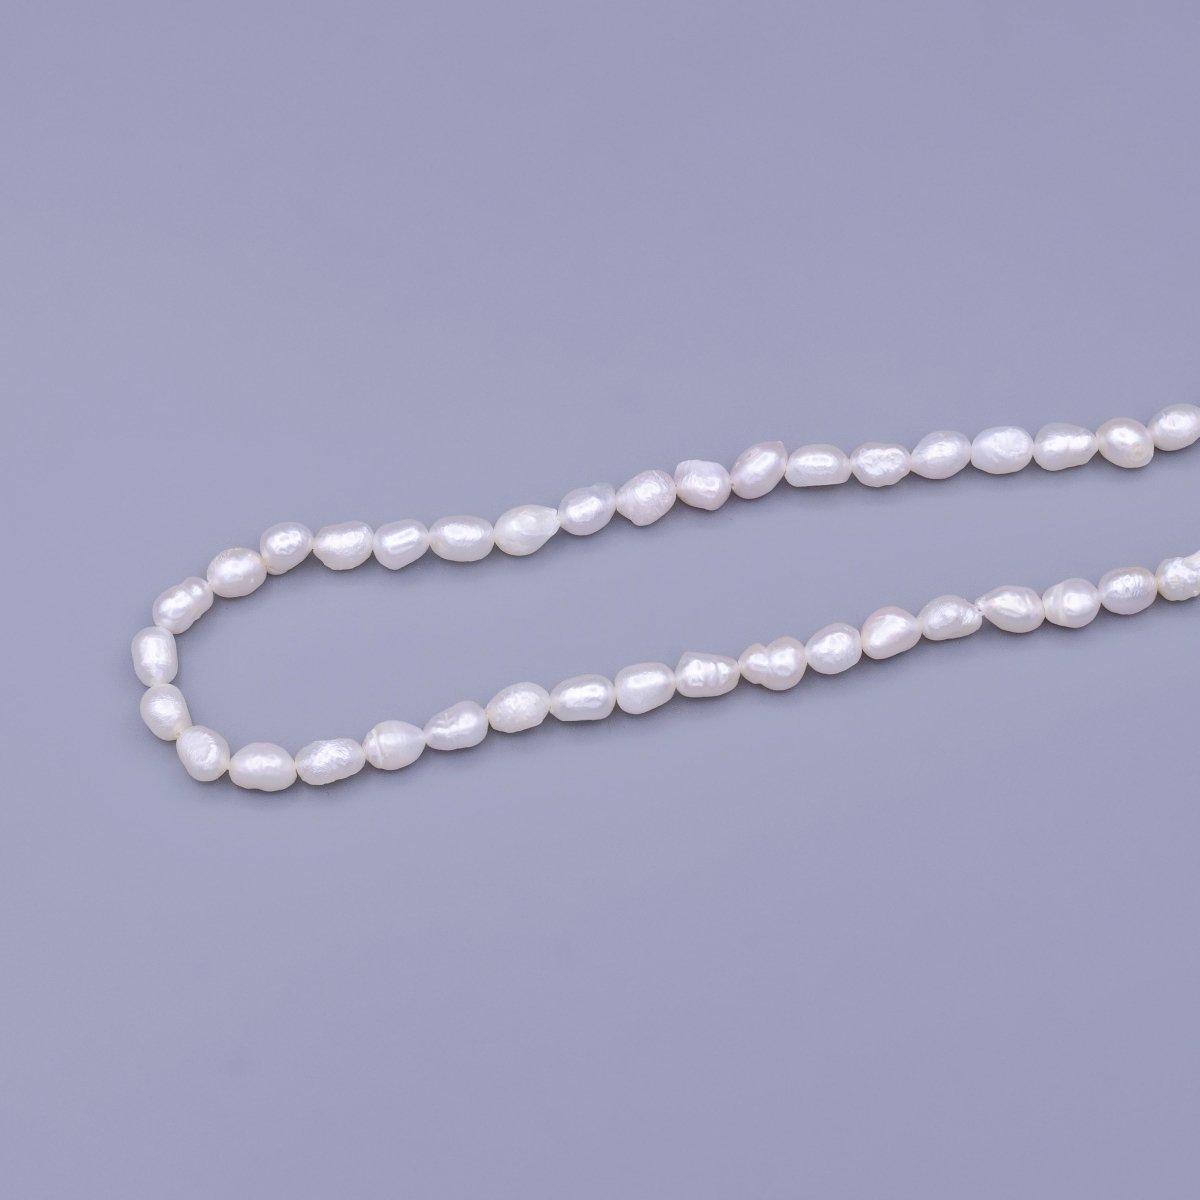 5.5mm Baroque Oval Freshwater Pearl 50 Pieces/Strand Jewelry Making Findings Supply | WA-1672 Clearance Pricing - DLUXCA